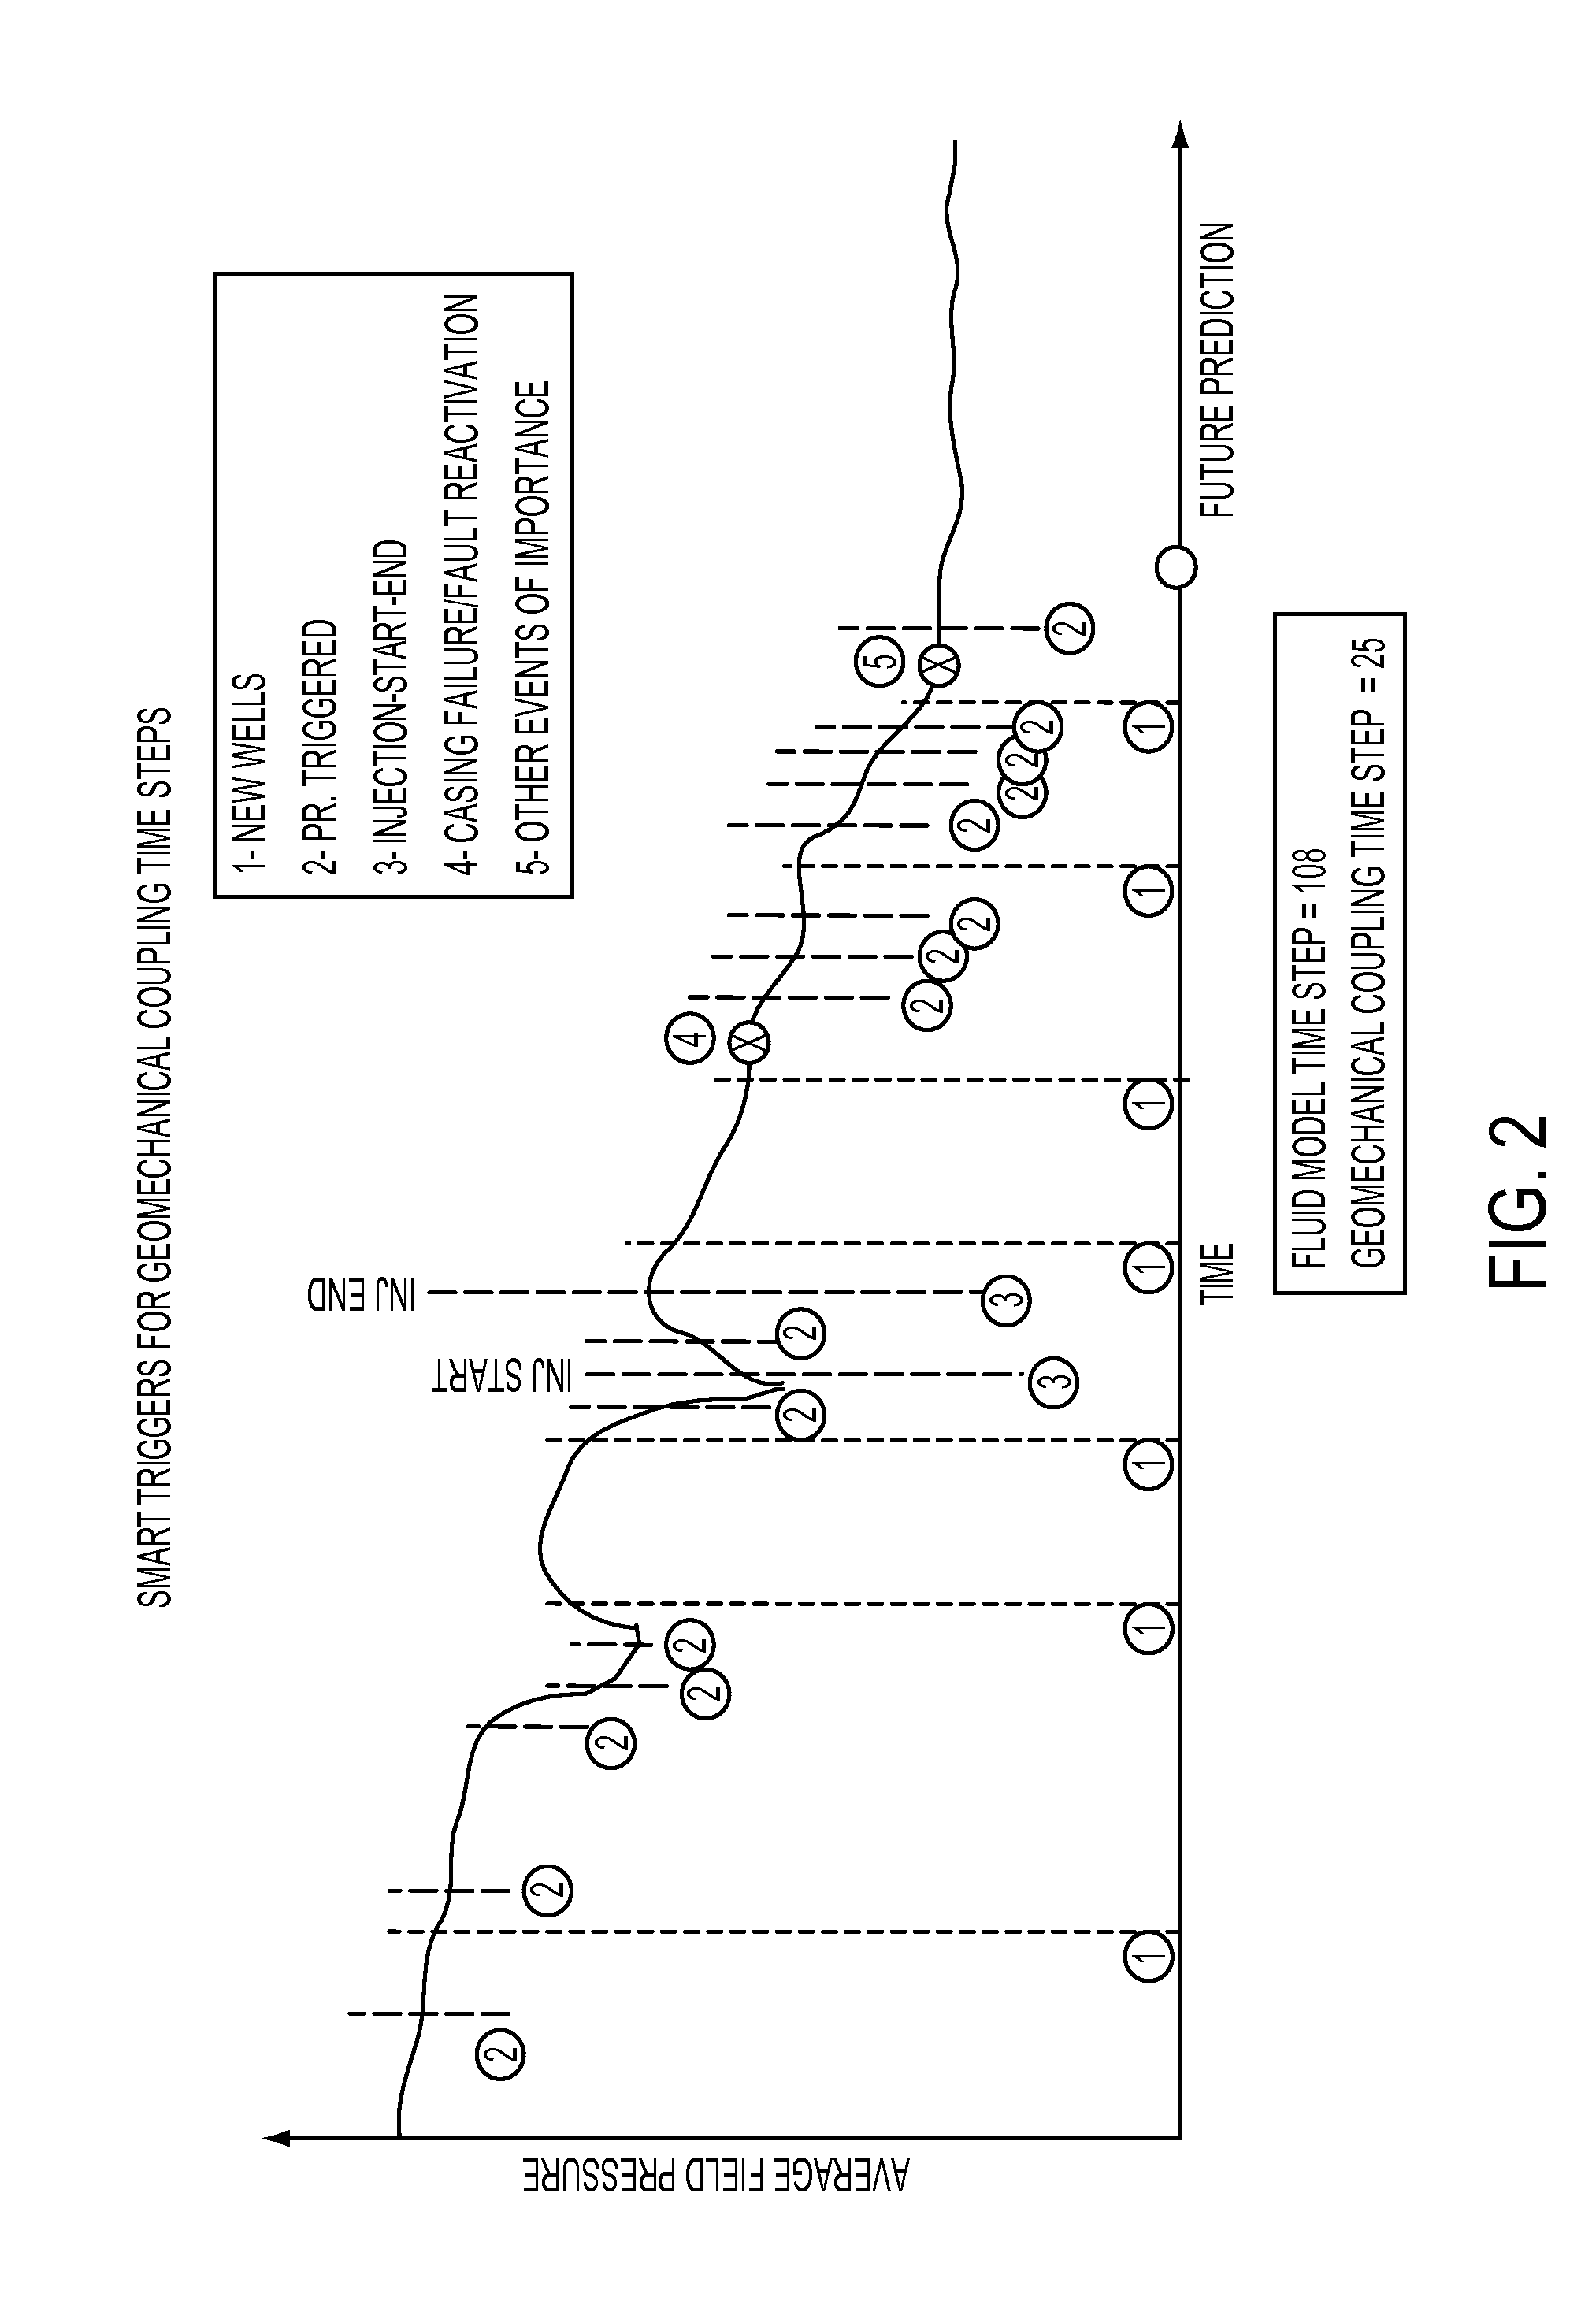 Method to couple fluid-flow and geomechanical models for integrated petroleum systems using known triggering events